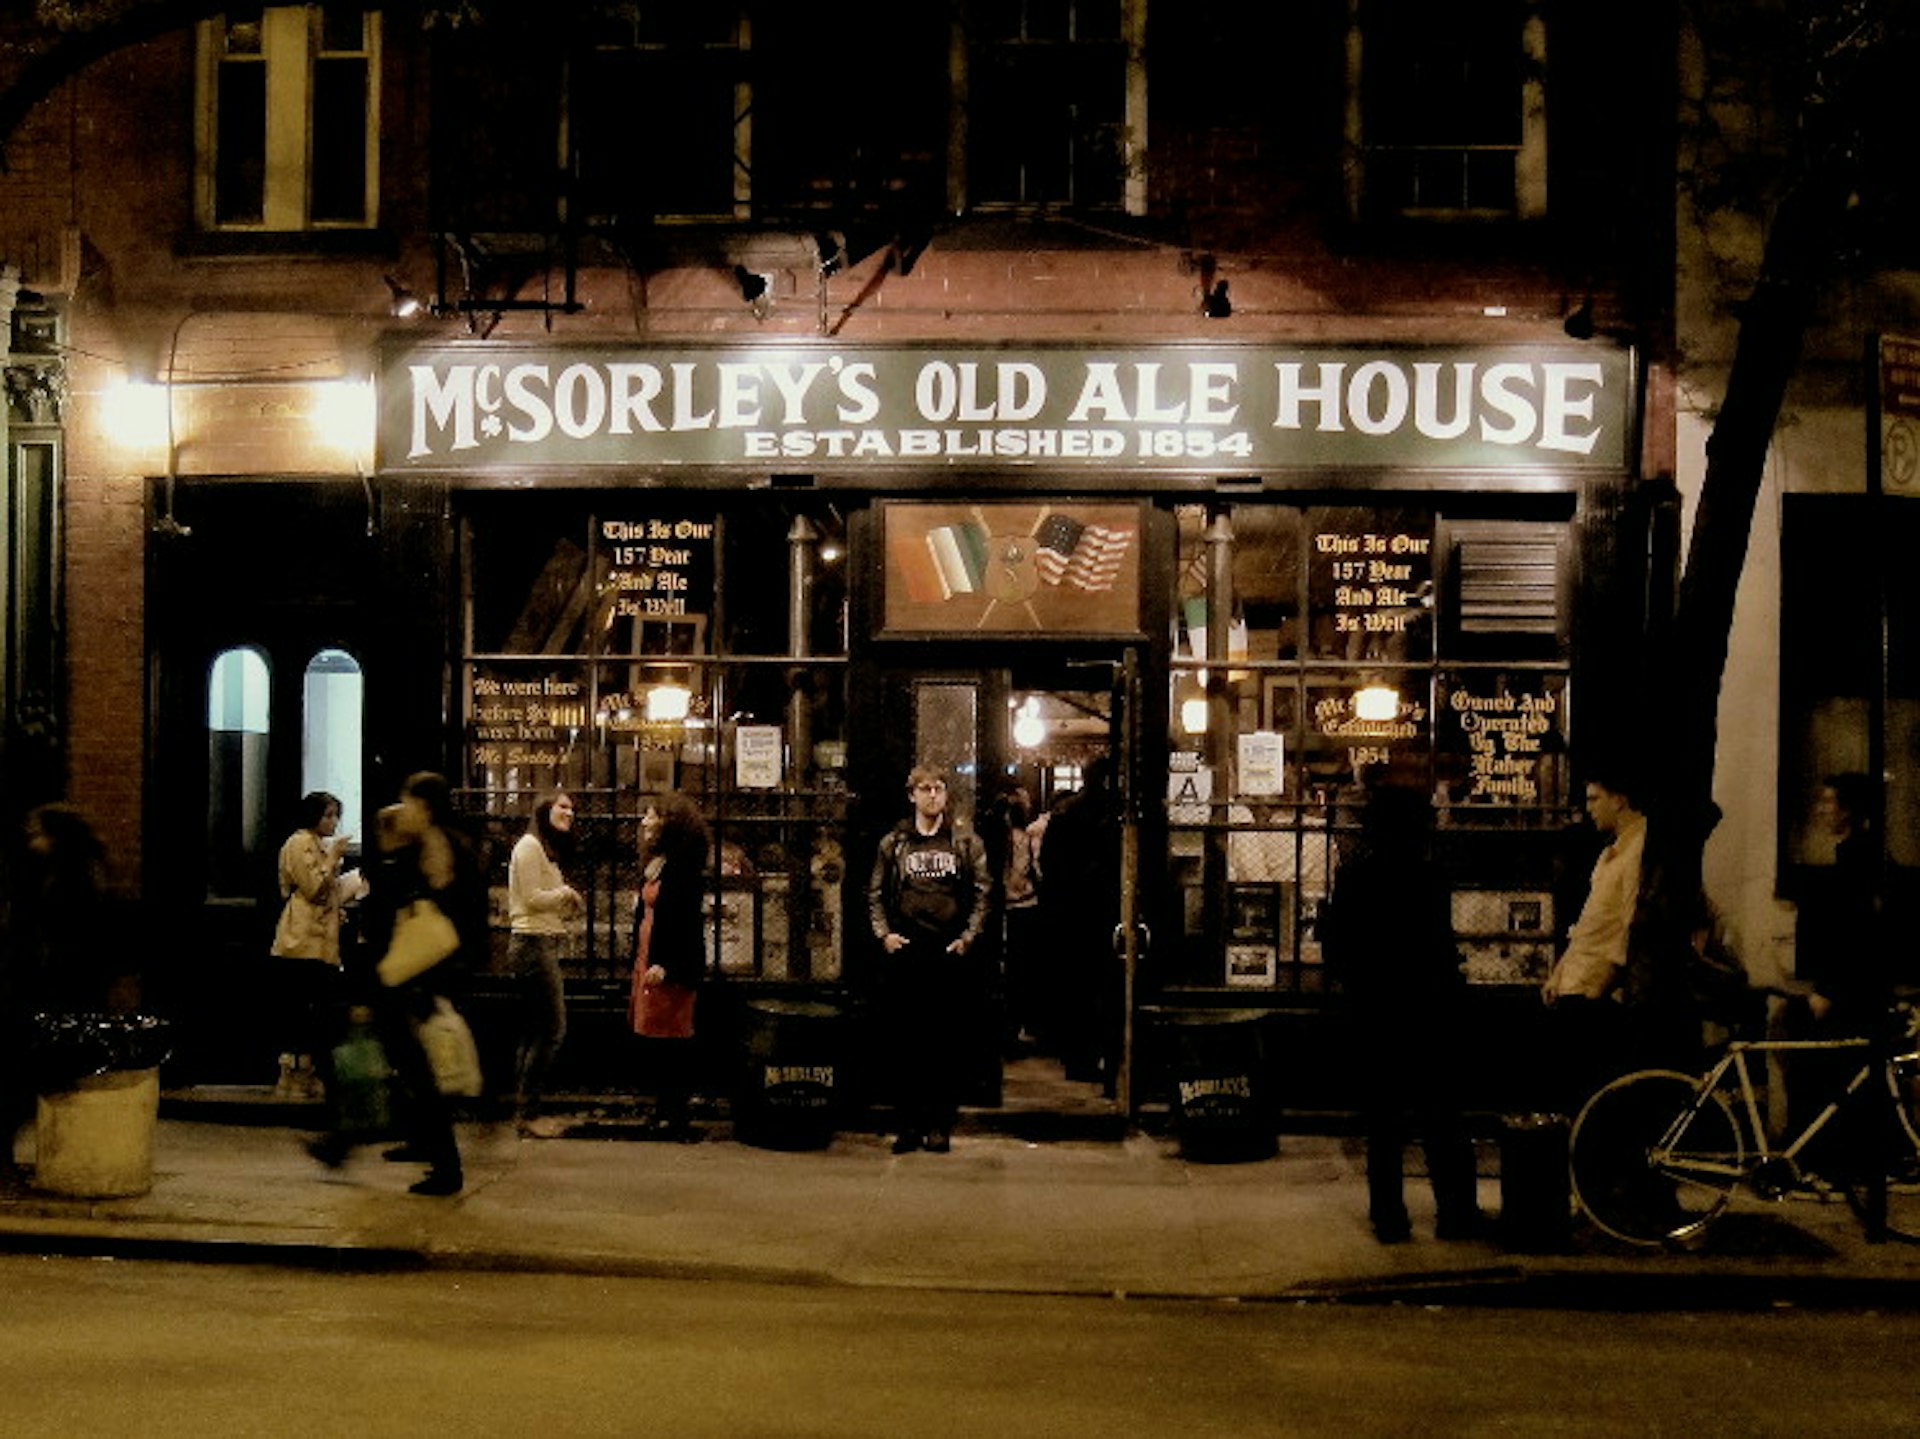 McSorley's Old Ale House. Image by Librarygroover / CC BY 2.0